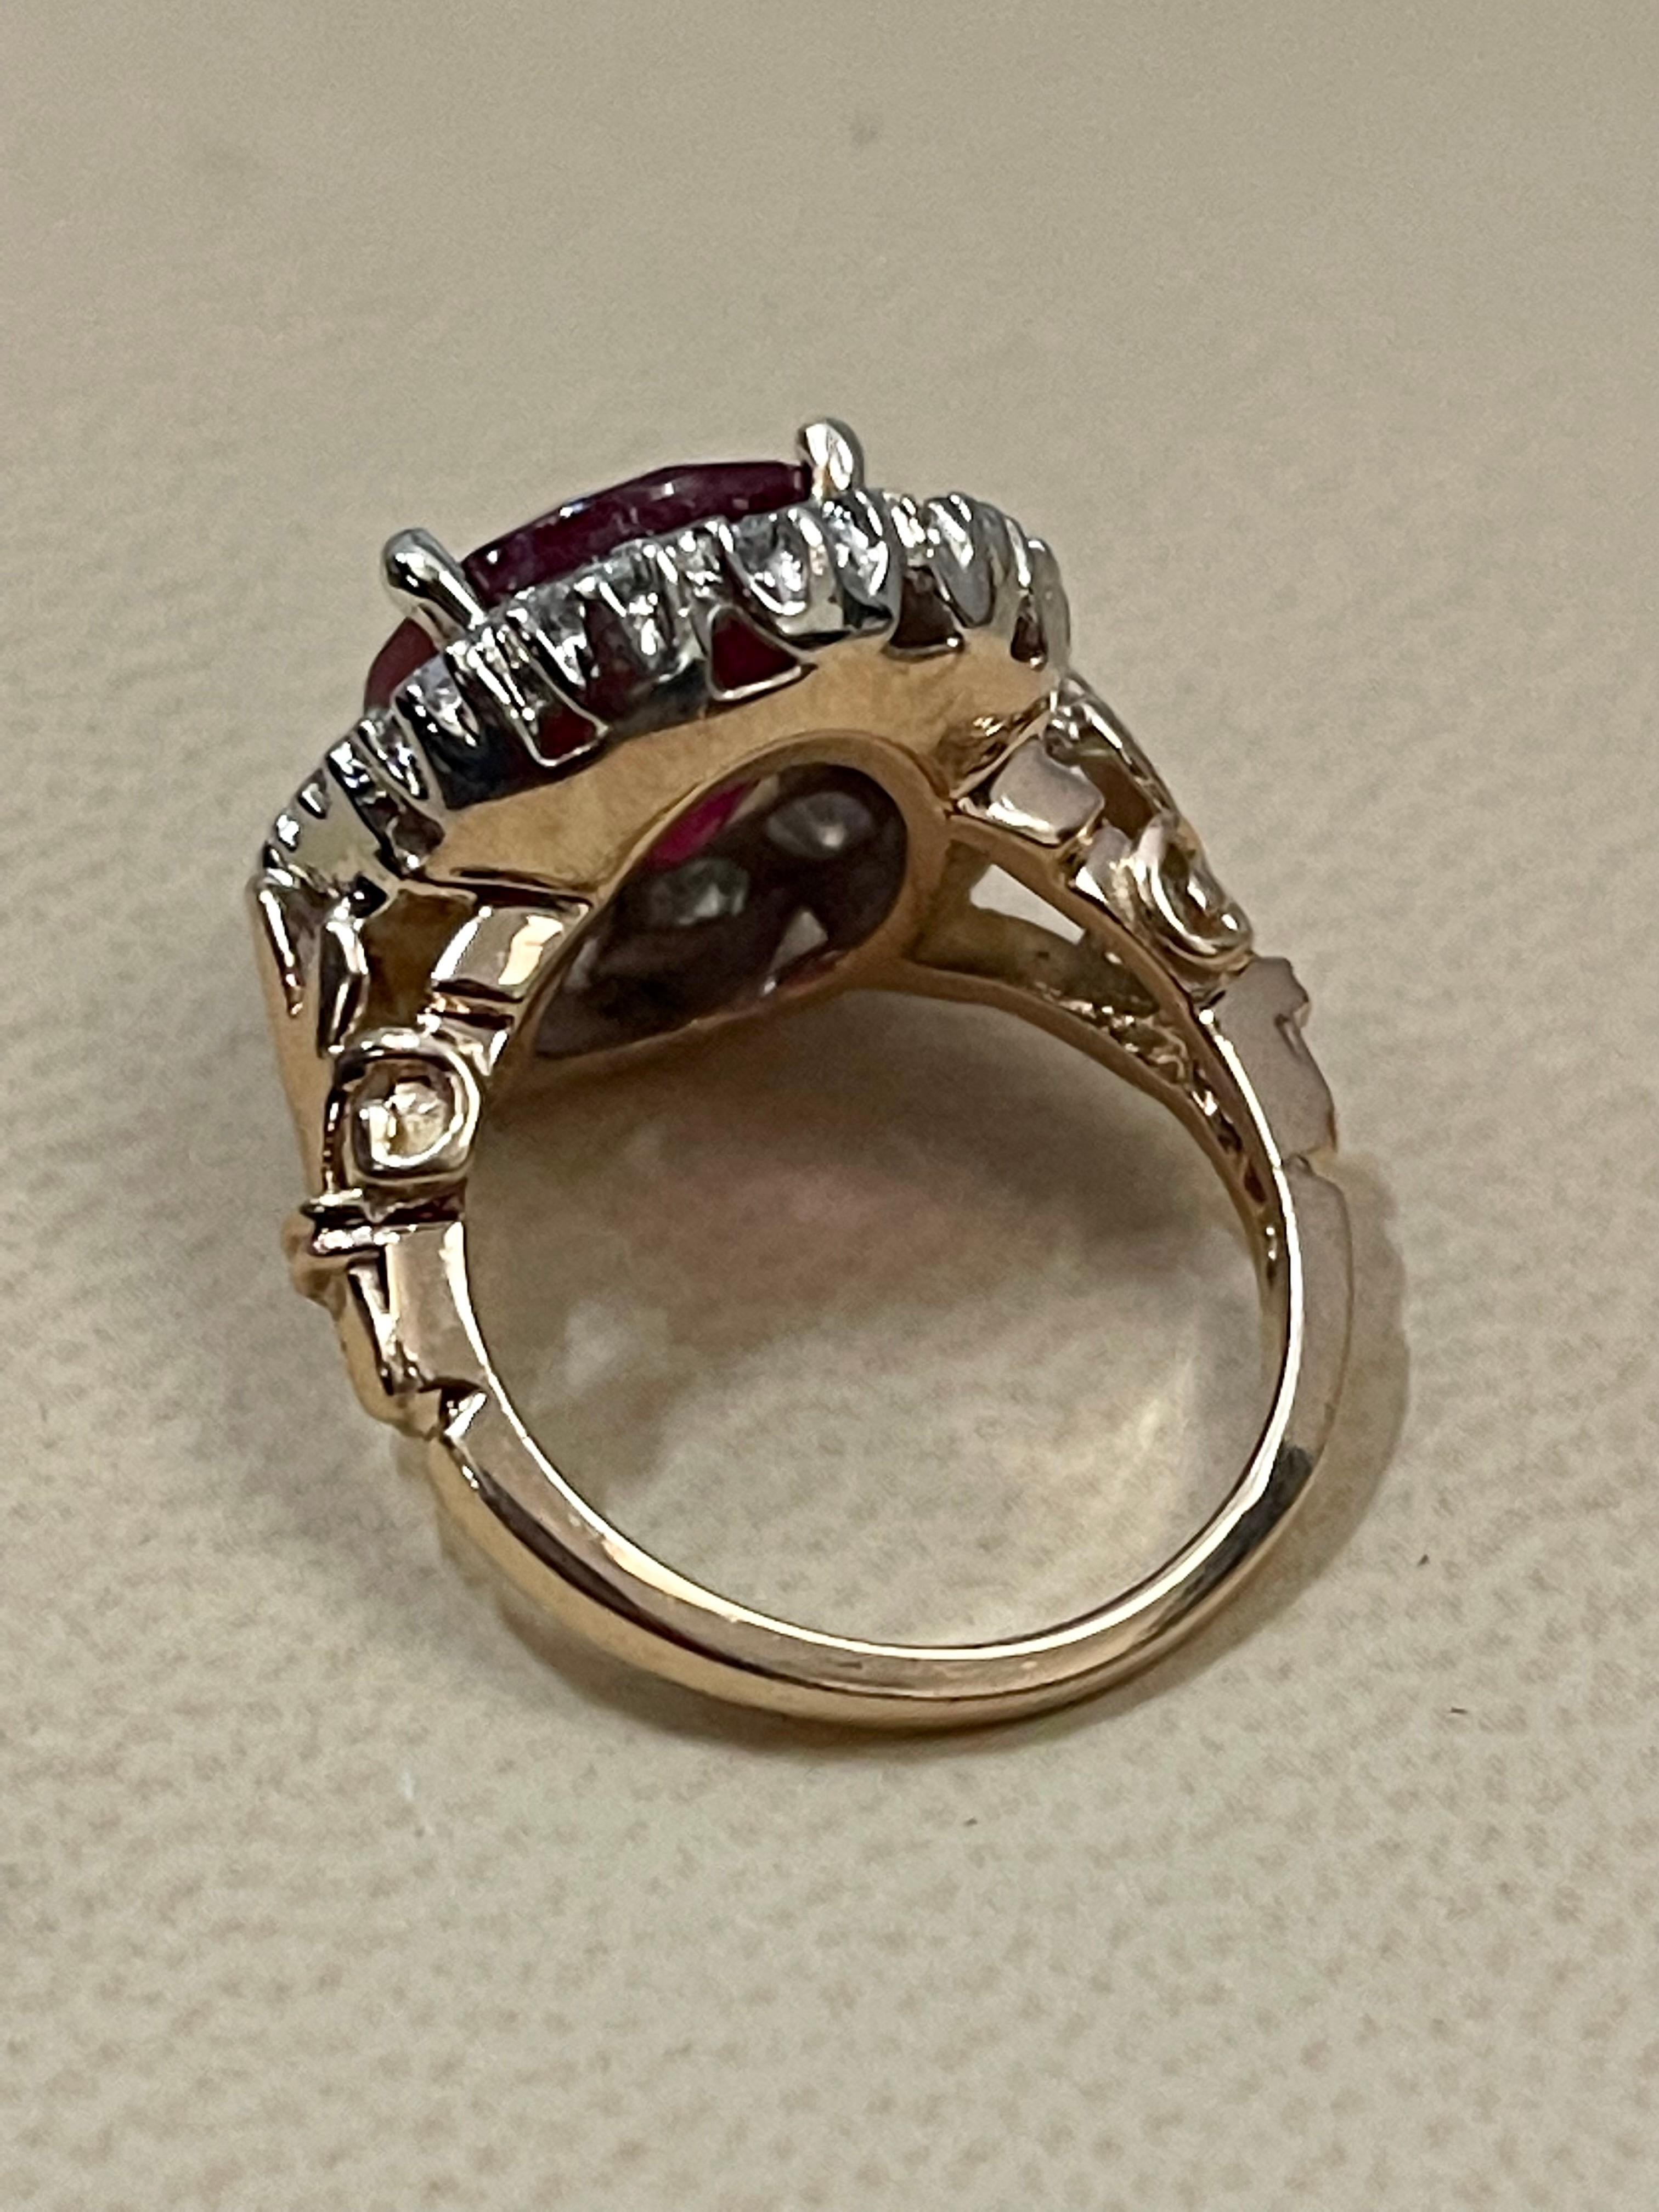 Oval 8 Carat Treated Ruby and 1 Carat Diamond 14 Karat Two Tone Gold Ring For Sale 8